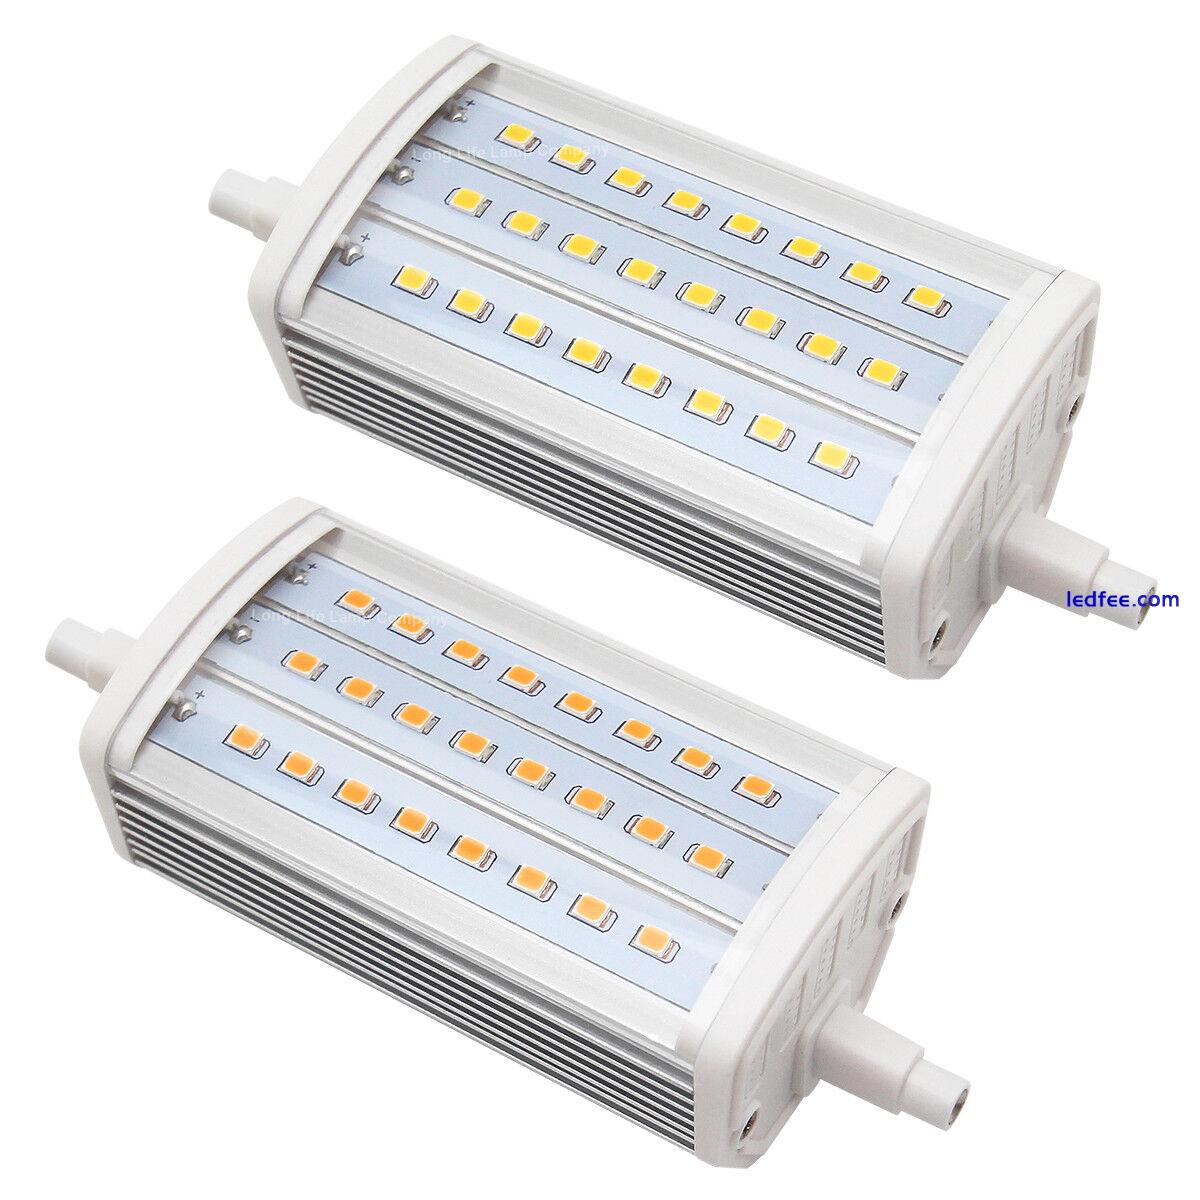 R7s J118 10W SMD LED Flood Light Bulb Replacement for Halogen Linear Tubes 118mm 0 